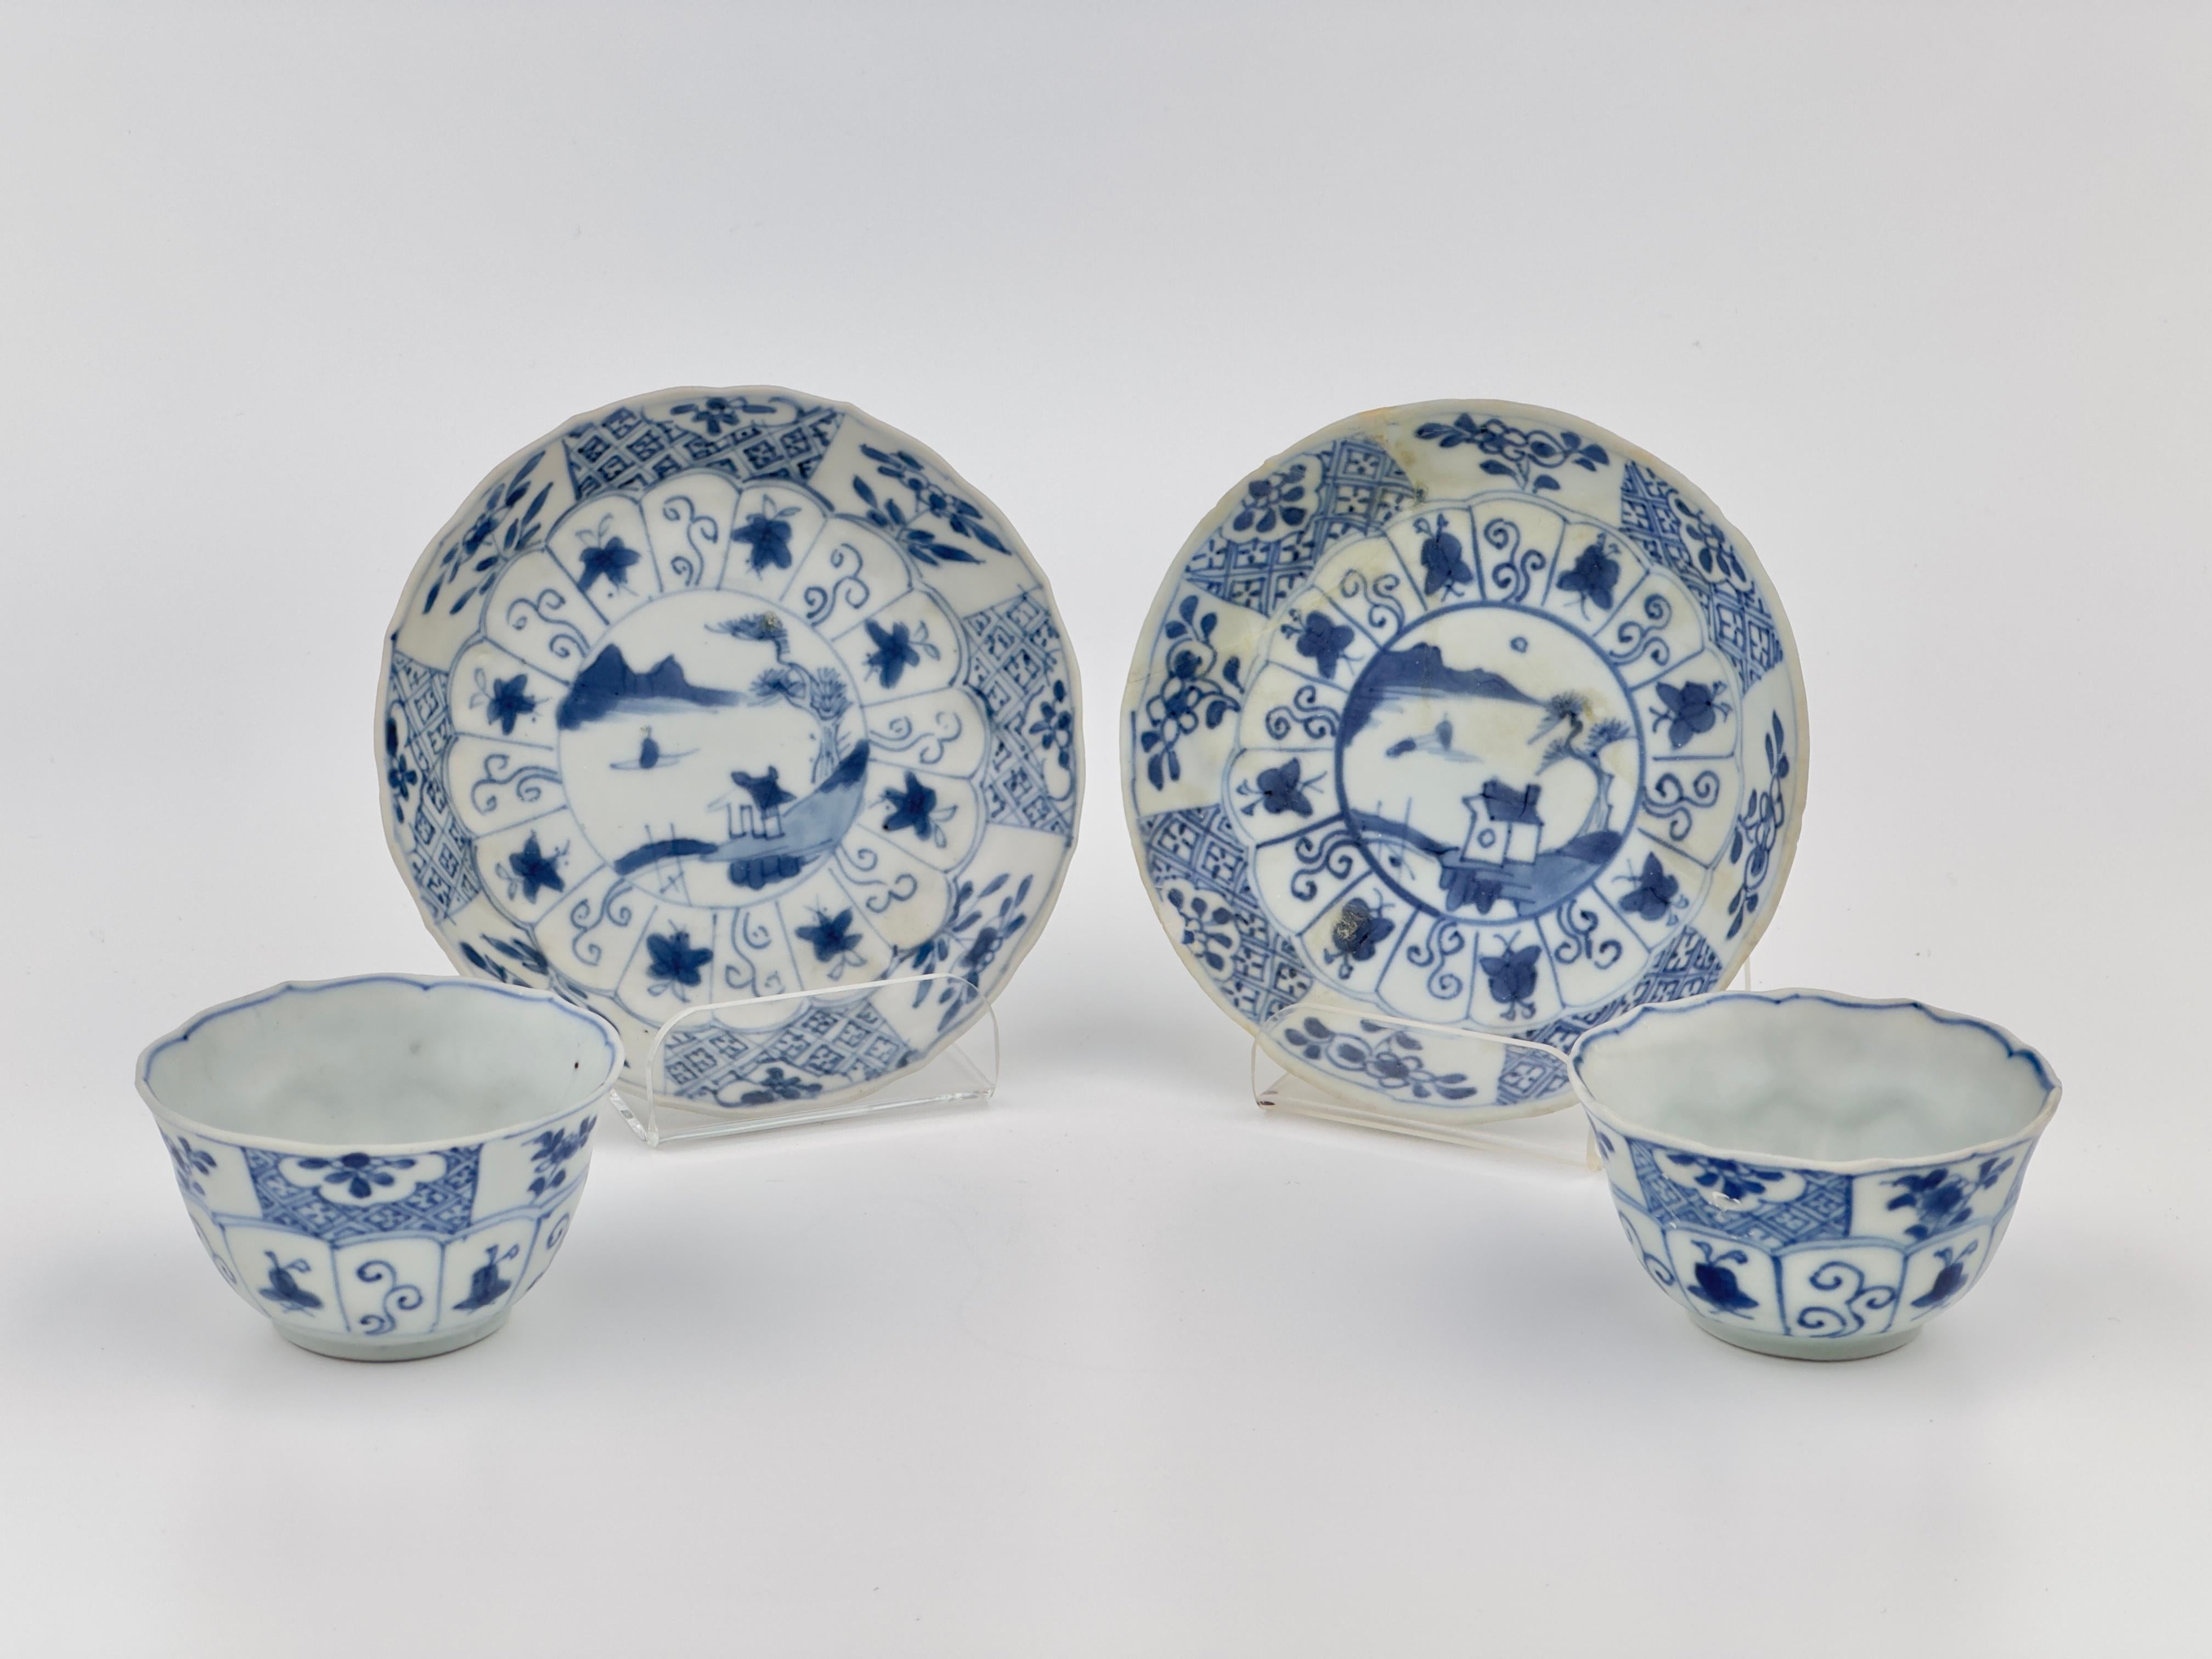 Chinese Blue and white tea set c 1725, Qing dynasty, Yongzheng reign For Sale